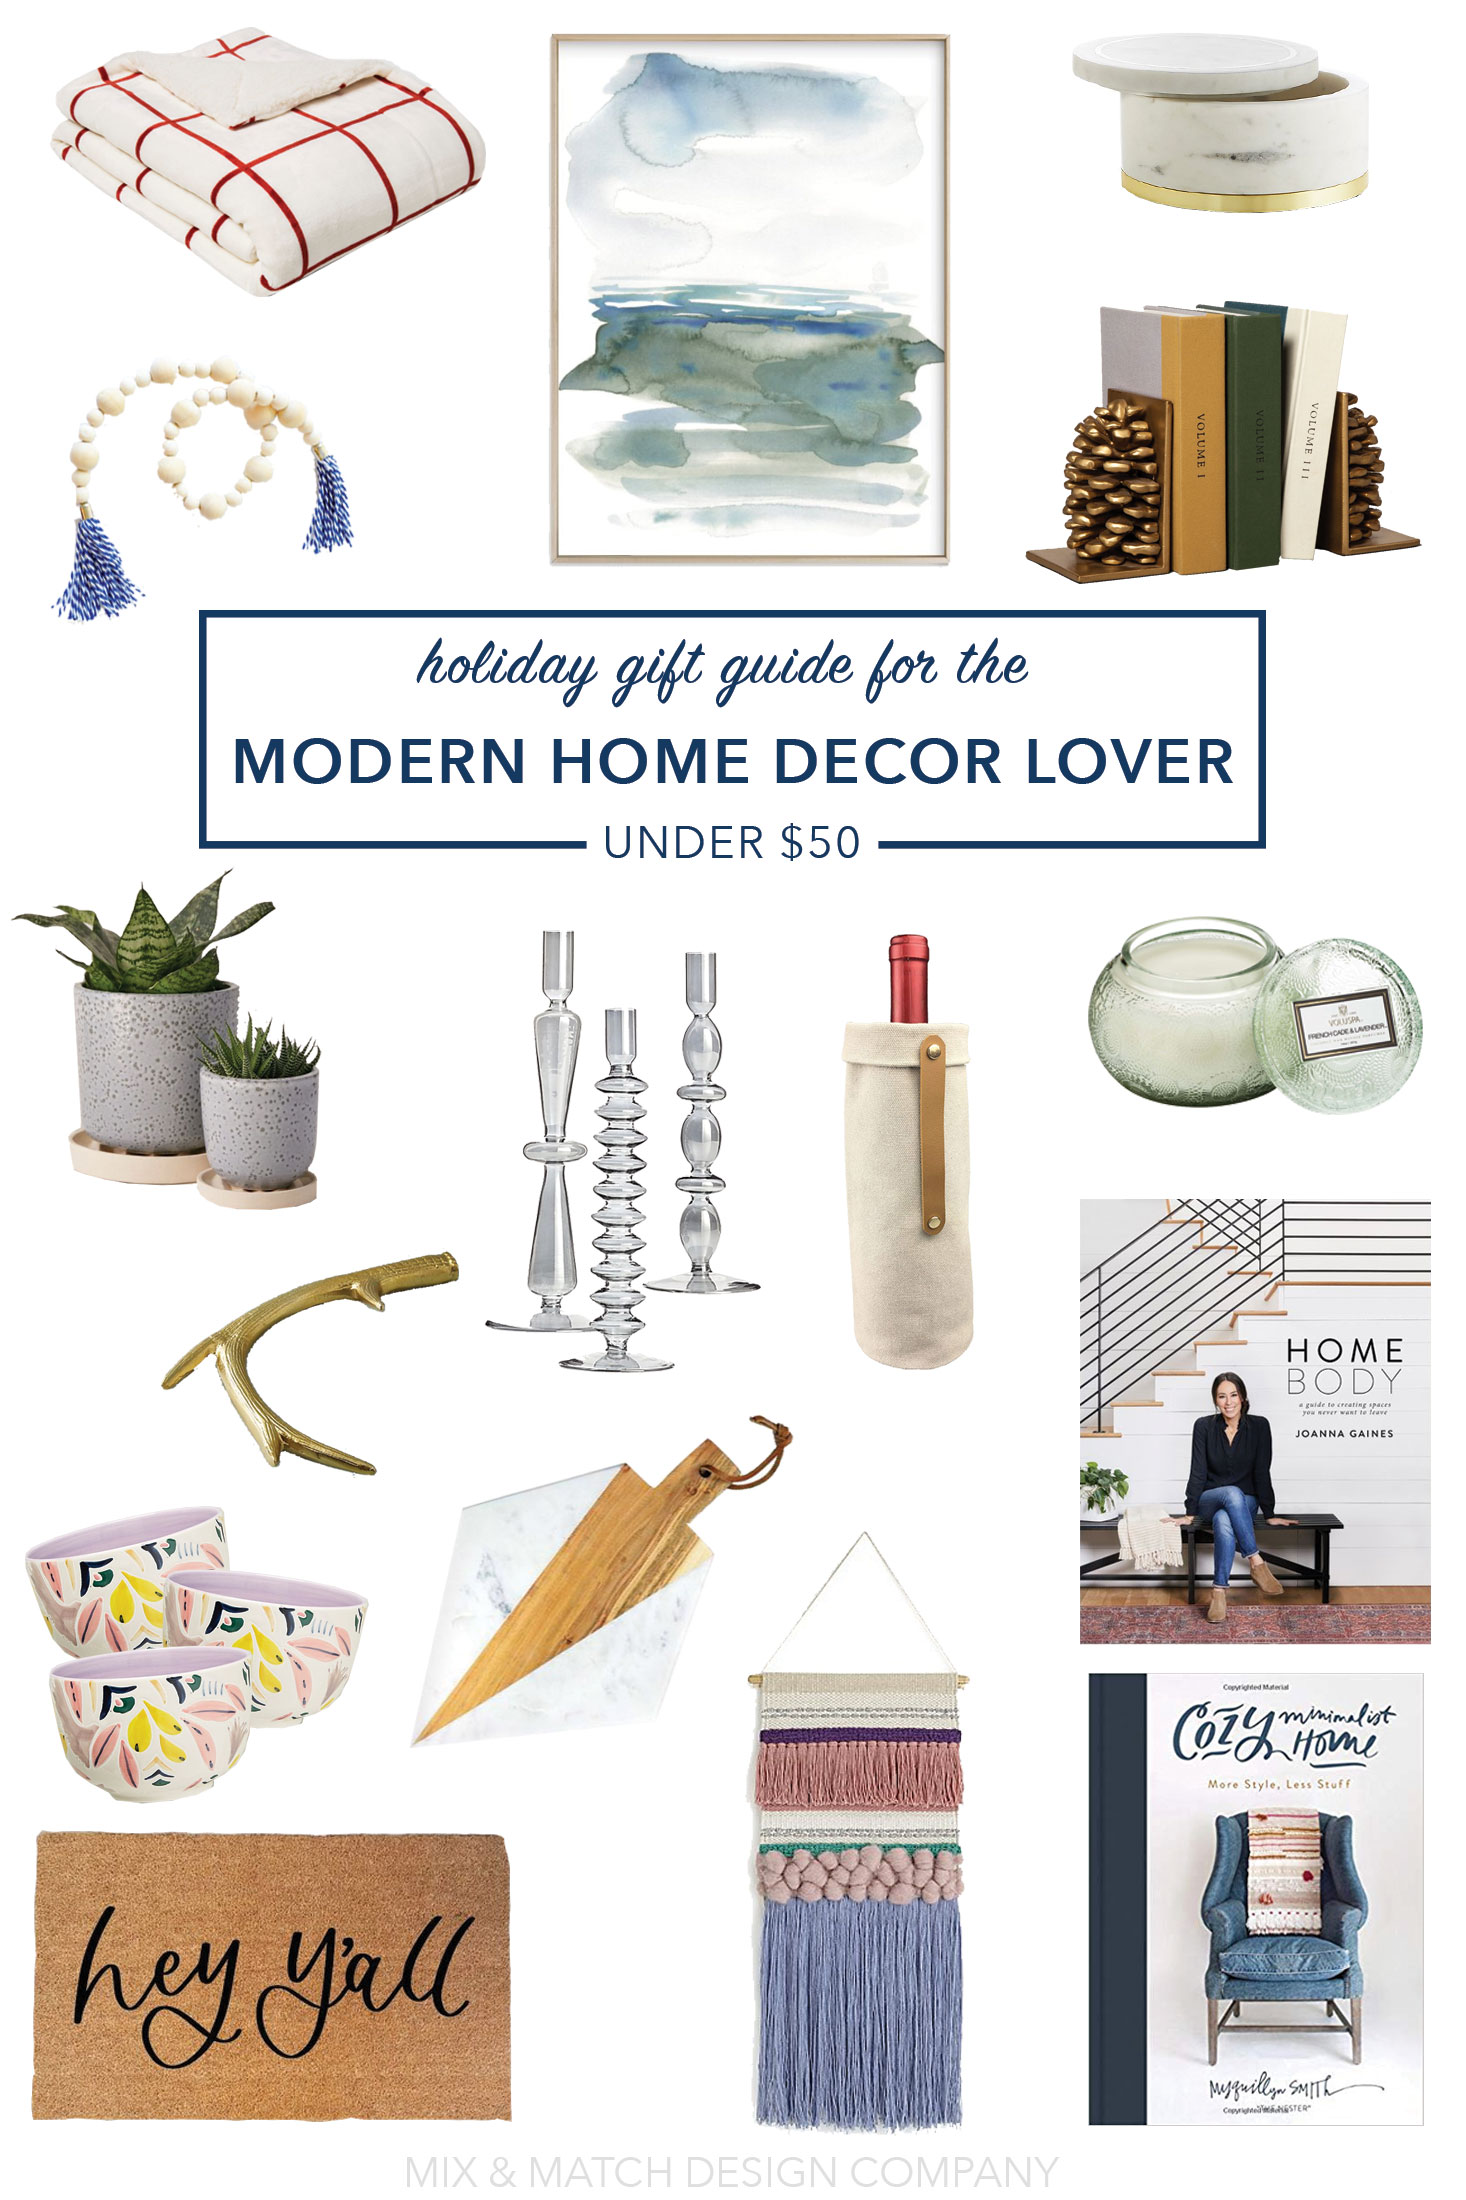 Holiday Gift Guide for the Modern Home Decor Lover - Under $50